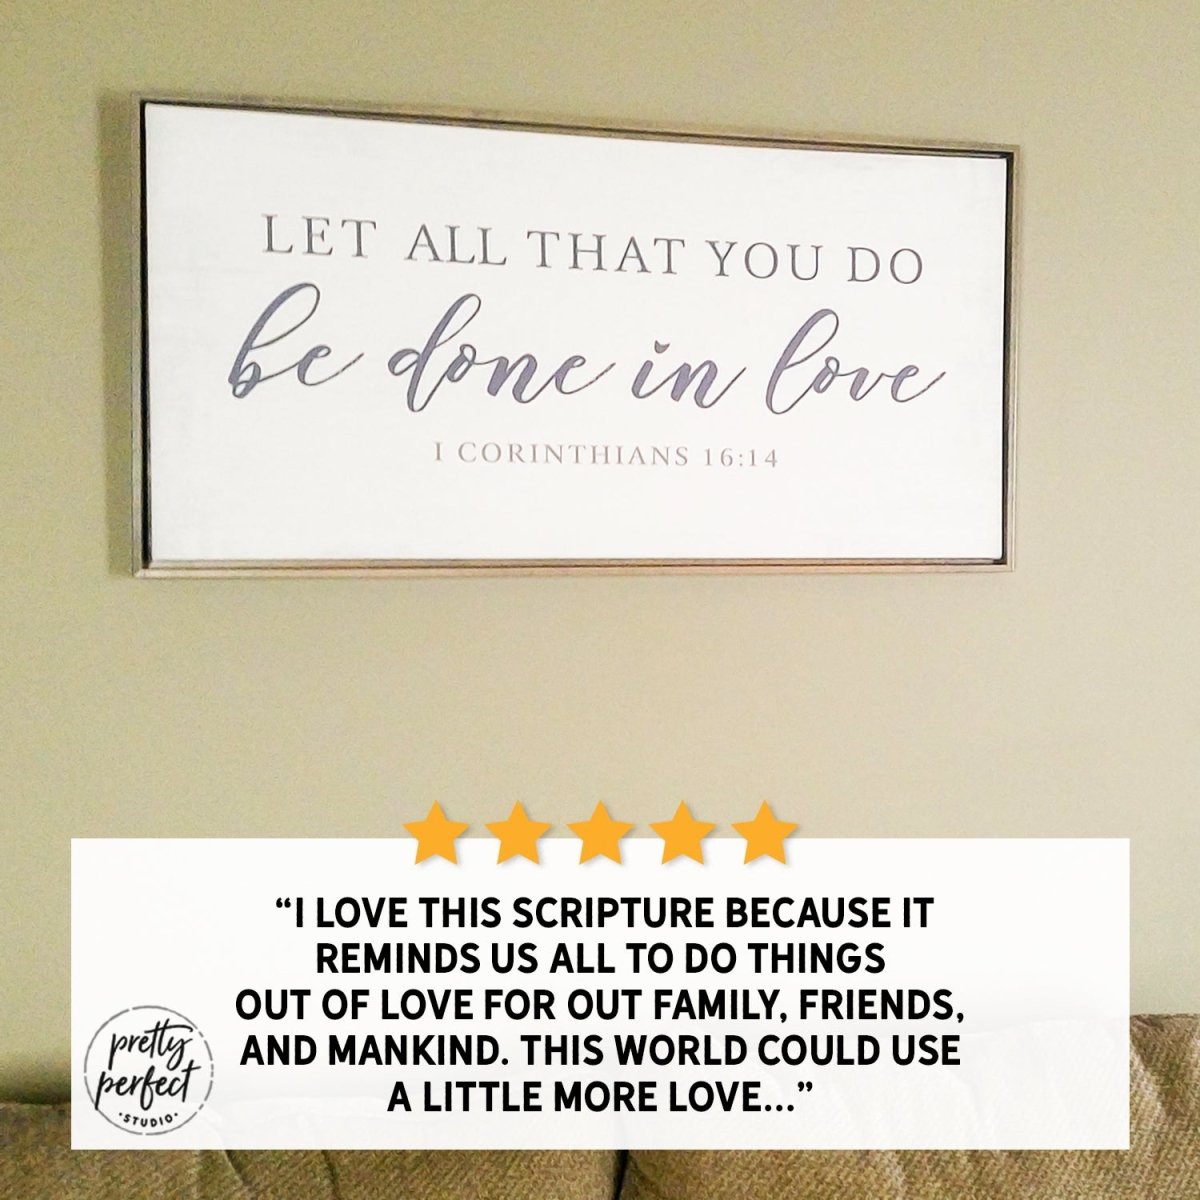 Customer product review for let all that you do be done sign by Pretty Perfect Studio